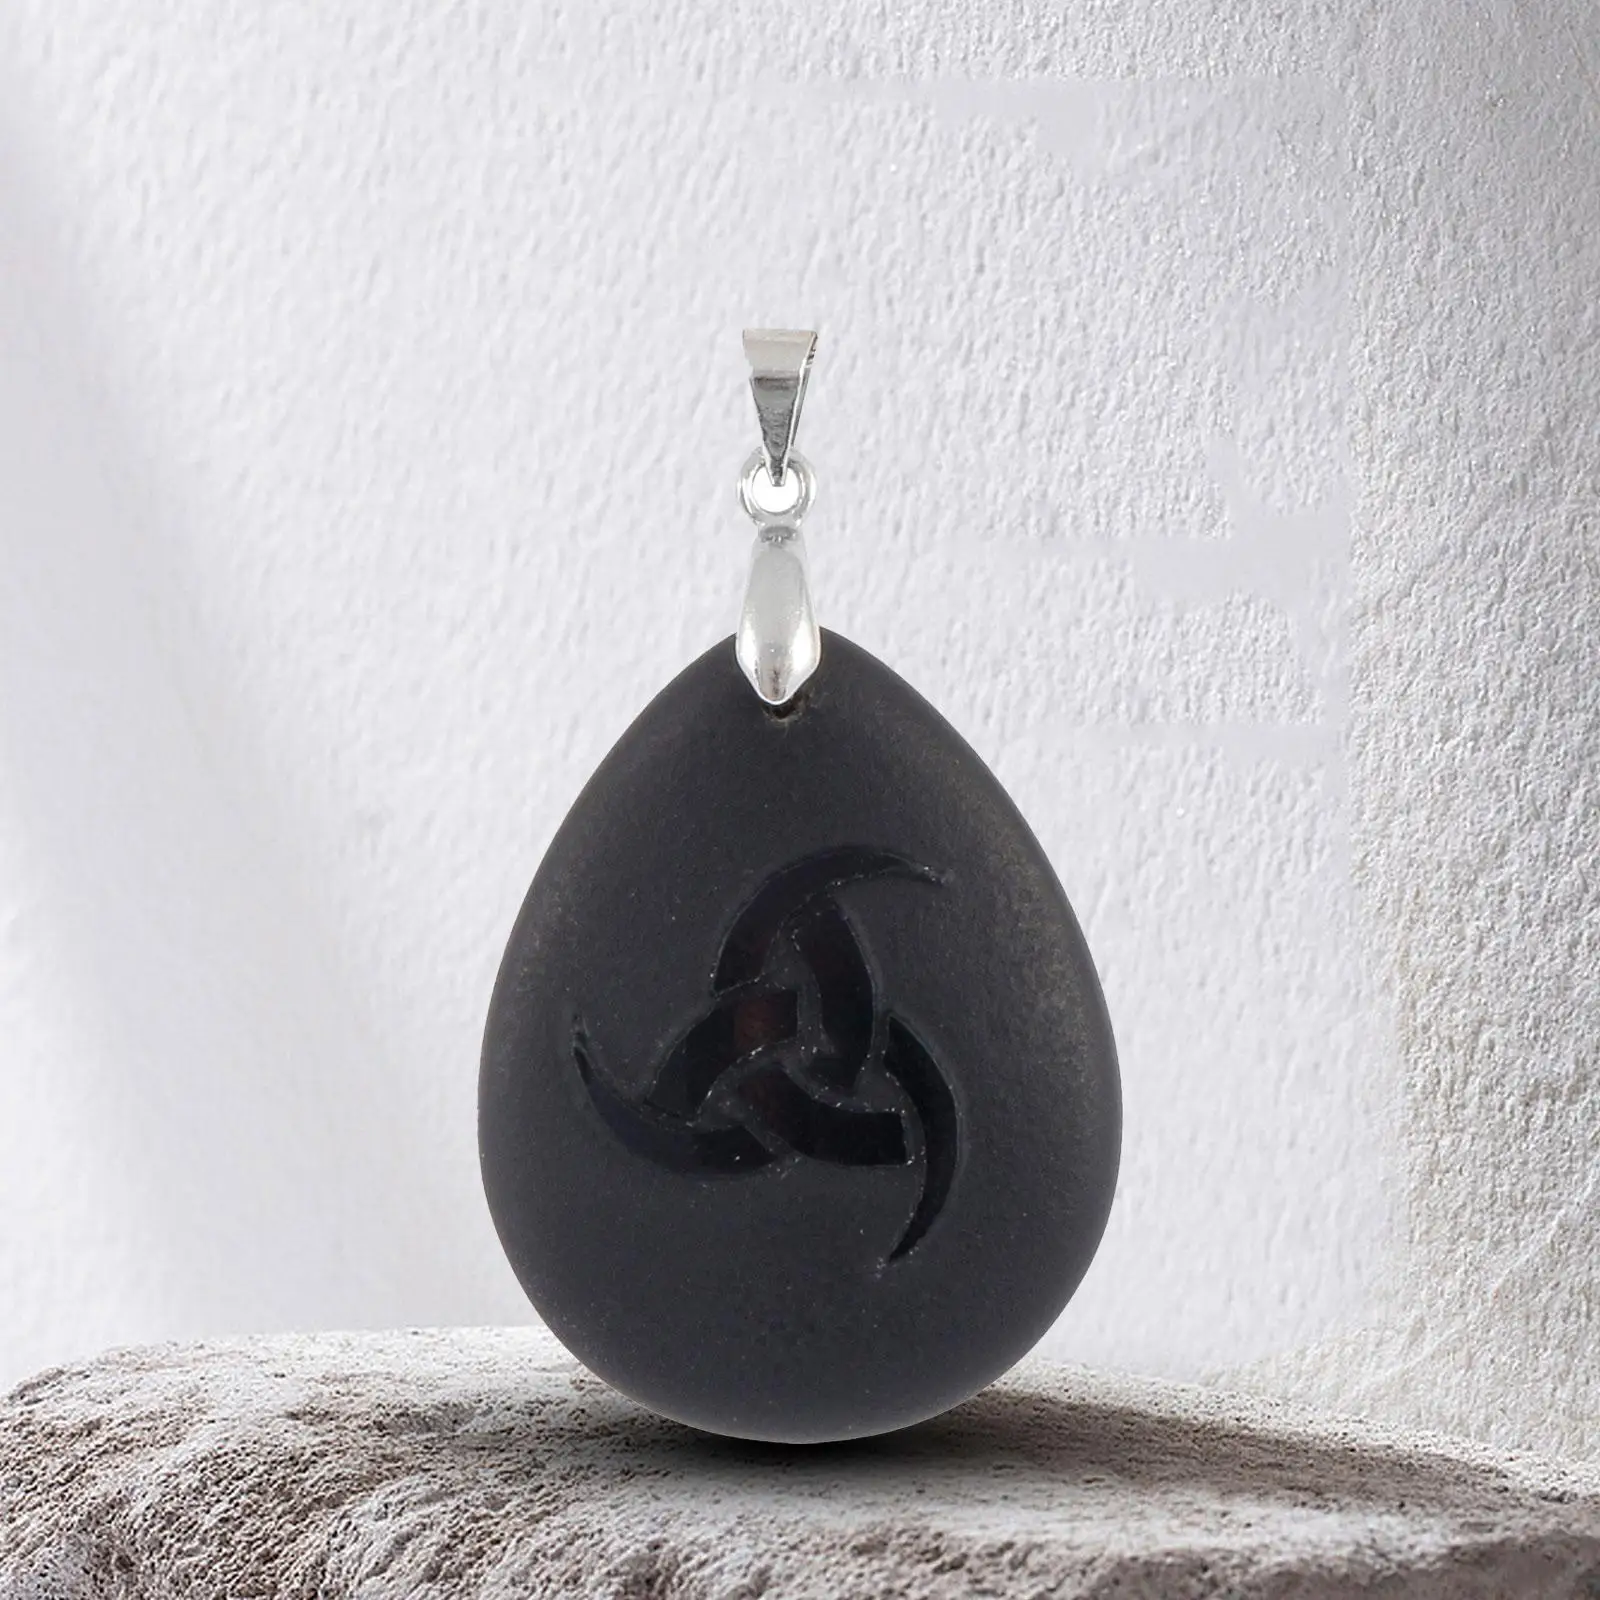 Necklace Pendant Nordic Style Beautiful Black Pendant Charm for Keyring DIY Jewelry DIY Craft Making Halloween Dating Decor